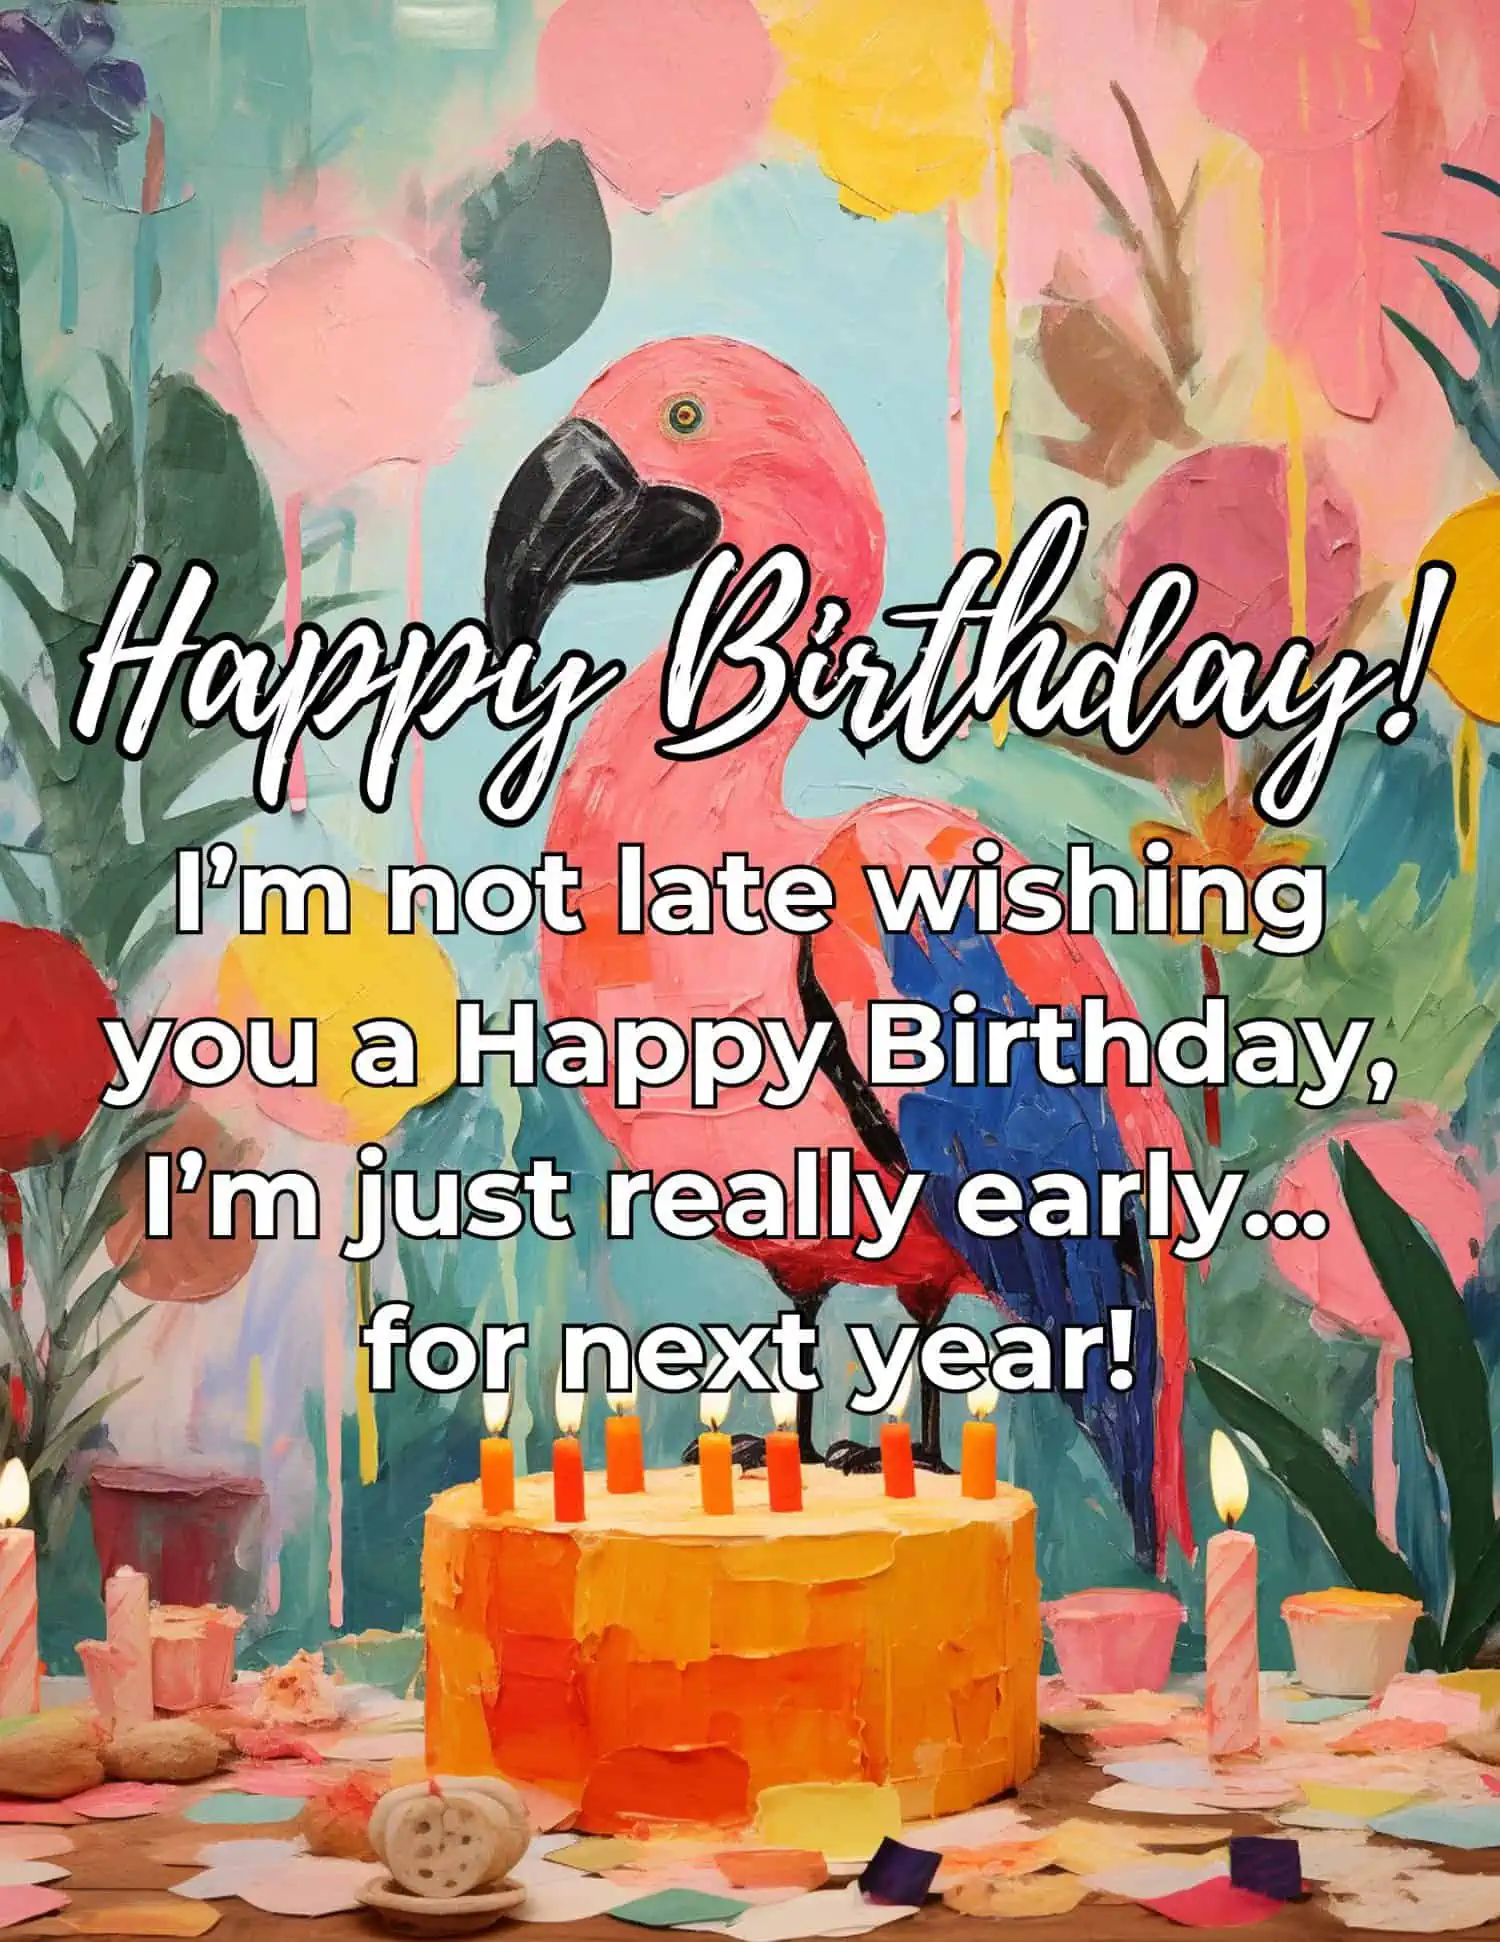 A collection of comical and charming belated birthday messages, perfect for lightening up the mood and expressing your late but genuine birthday greetings.